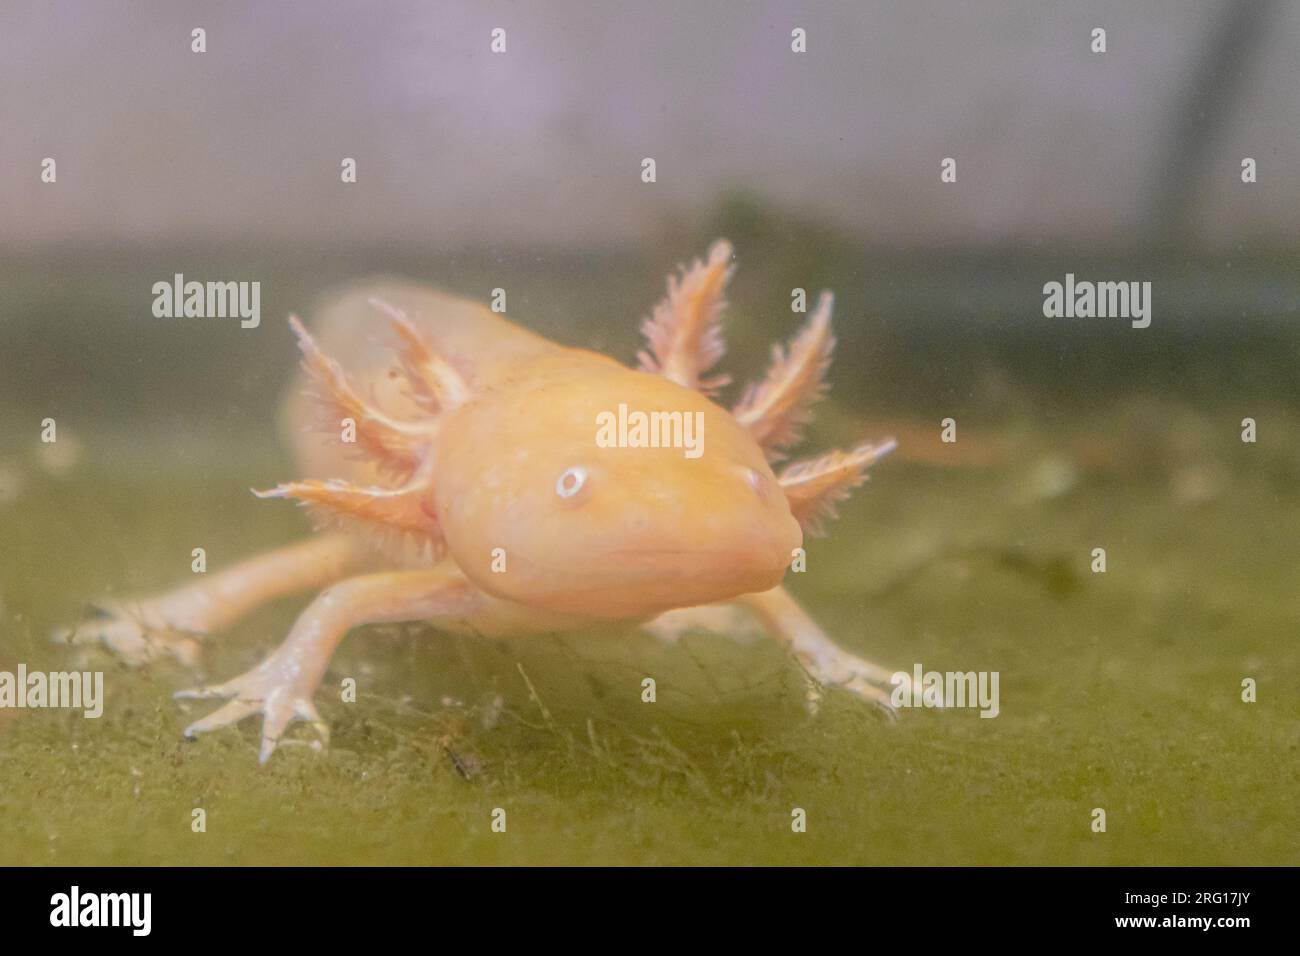 Selective focus of albino Mexican ajolote salamander standing on green surface and looking at camera Stock Photo